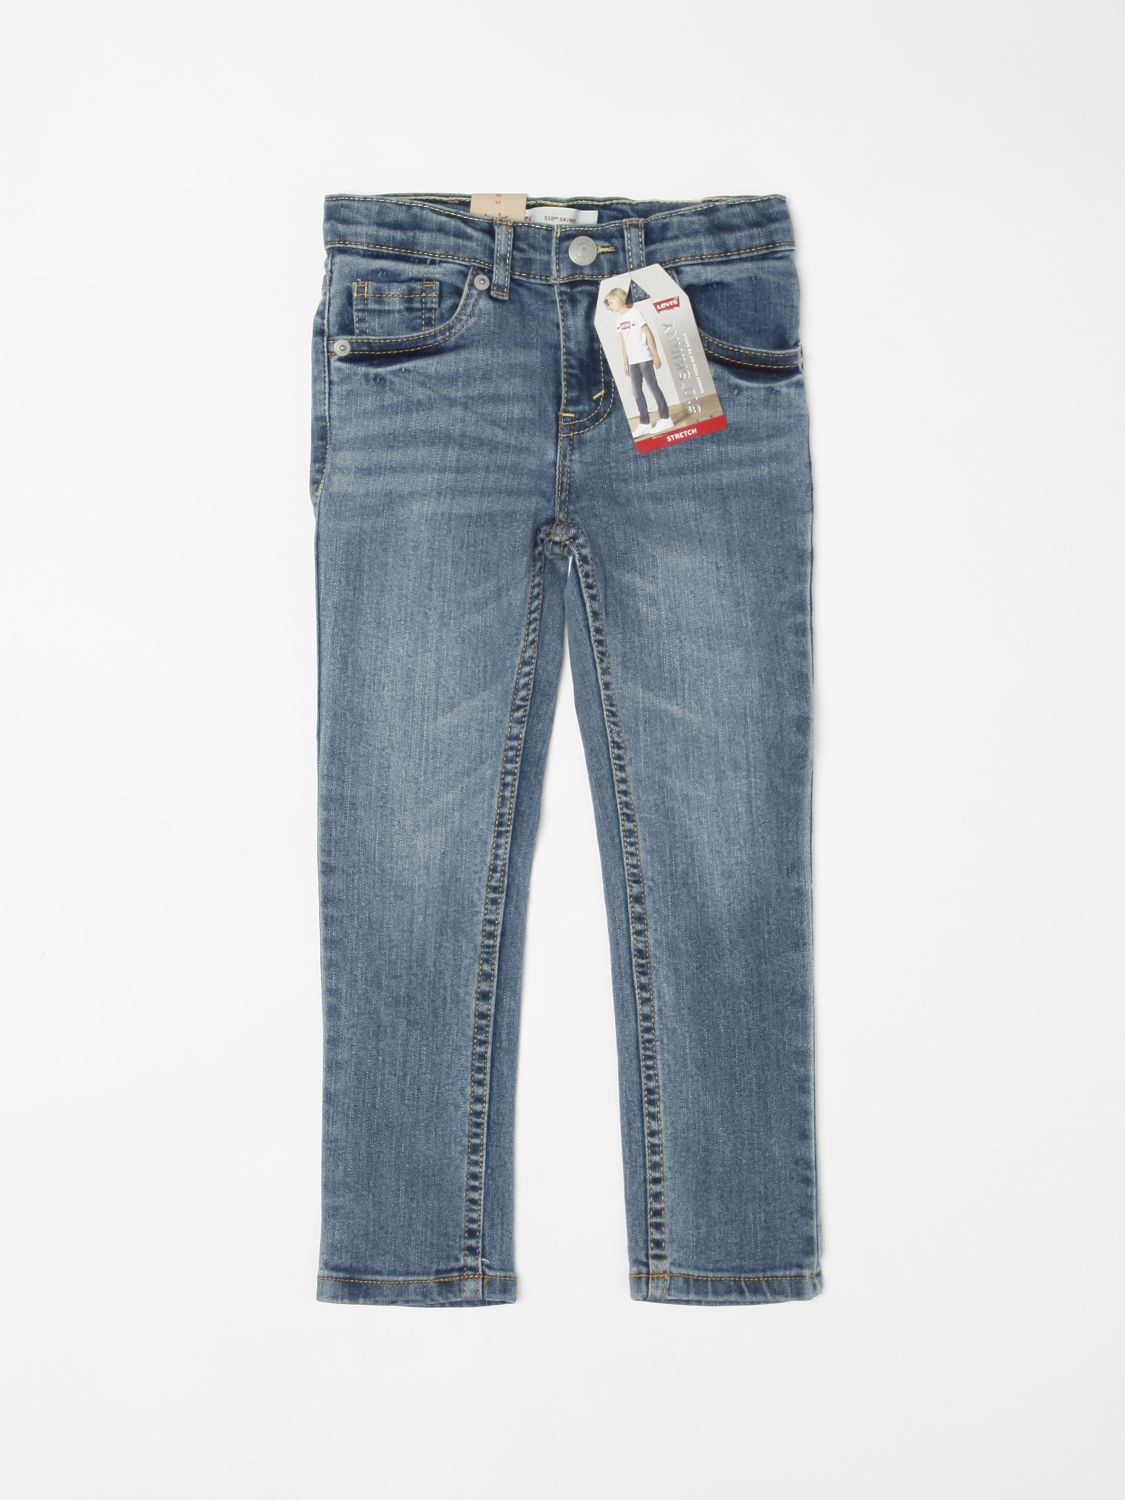 Jeans Levi's: Jeans Levi's washed a 5 tasche blue 1